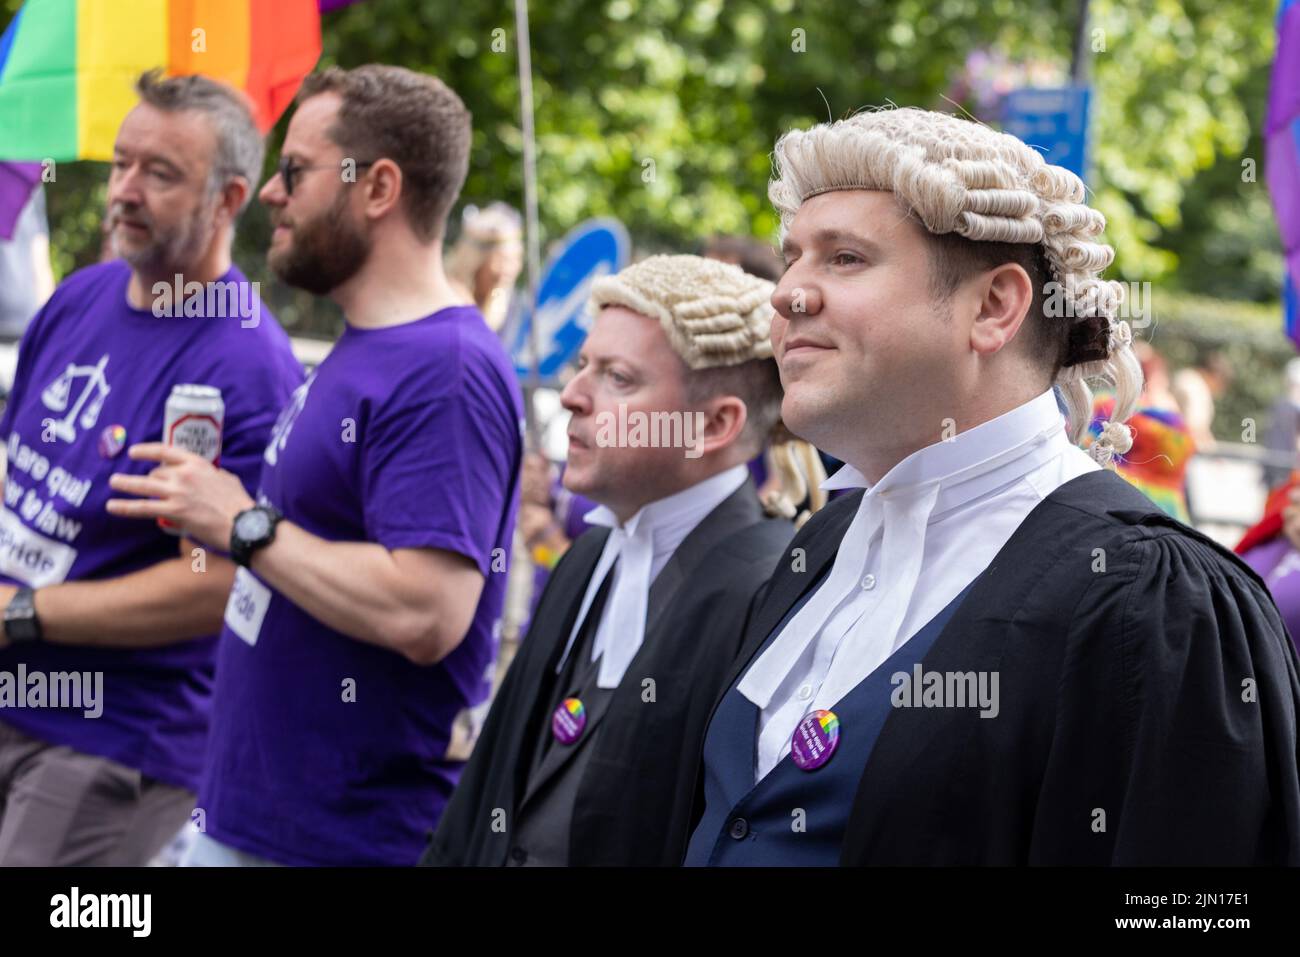 Barristers march as part of the Legal block at  London Pride 2022, dressed in traditional gowns and wigs Stock Photo